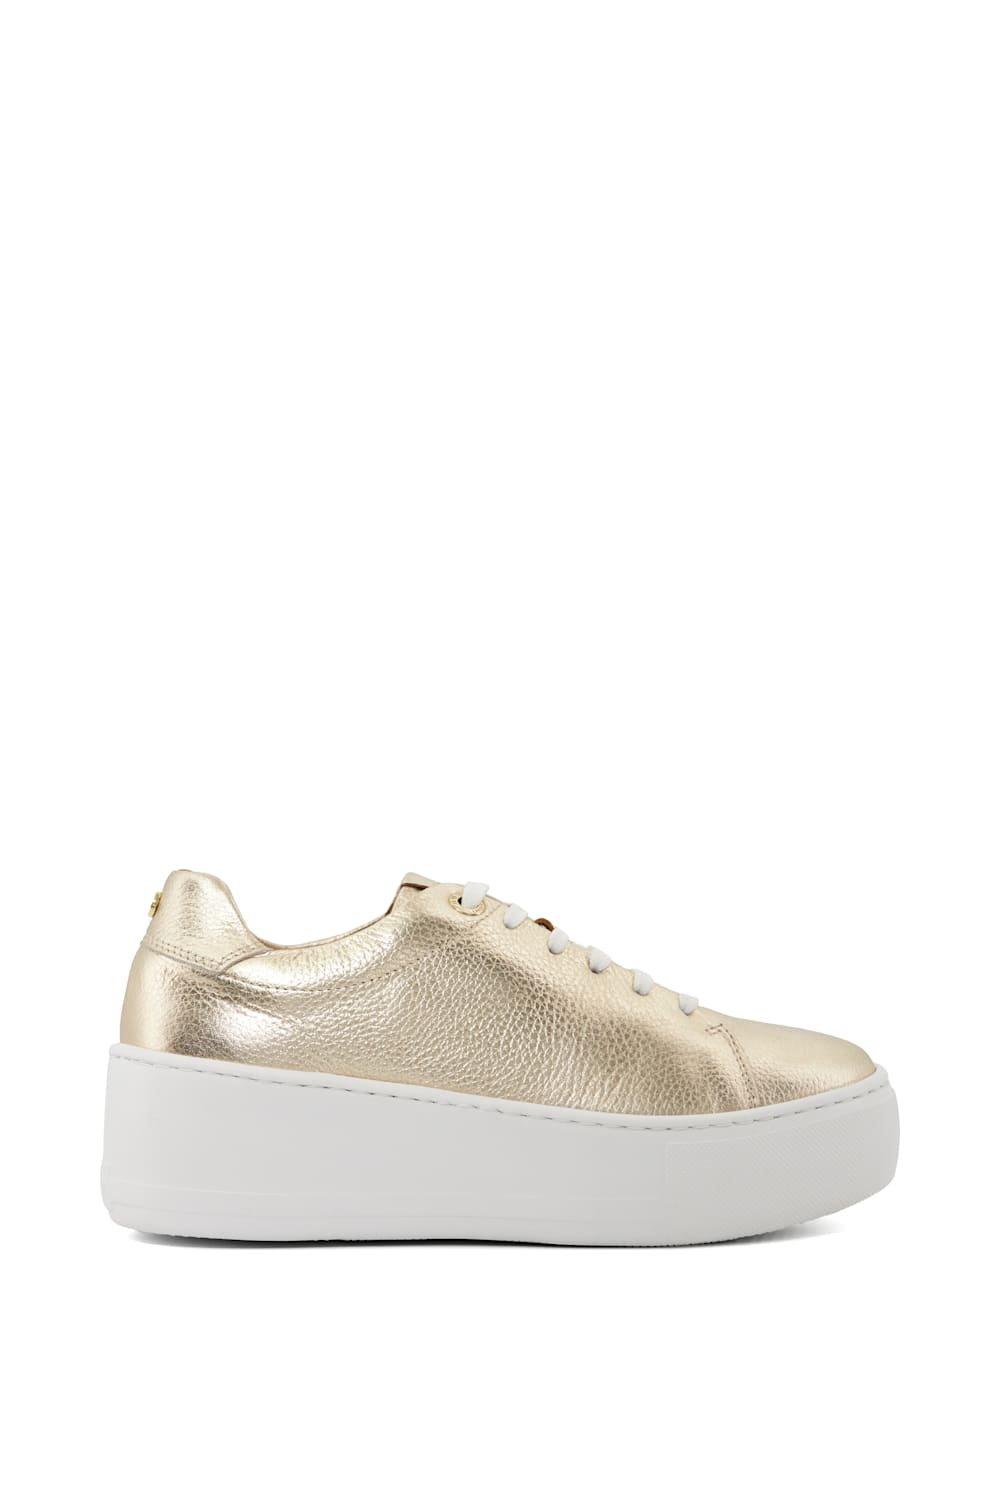 Trainers | 'Estrid' Leather Trainers | Dune London